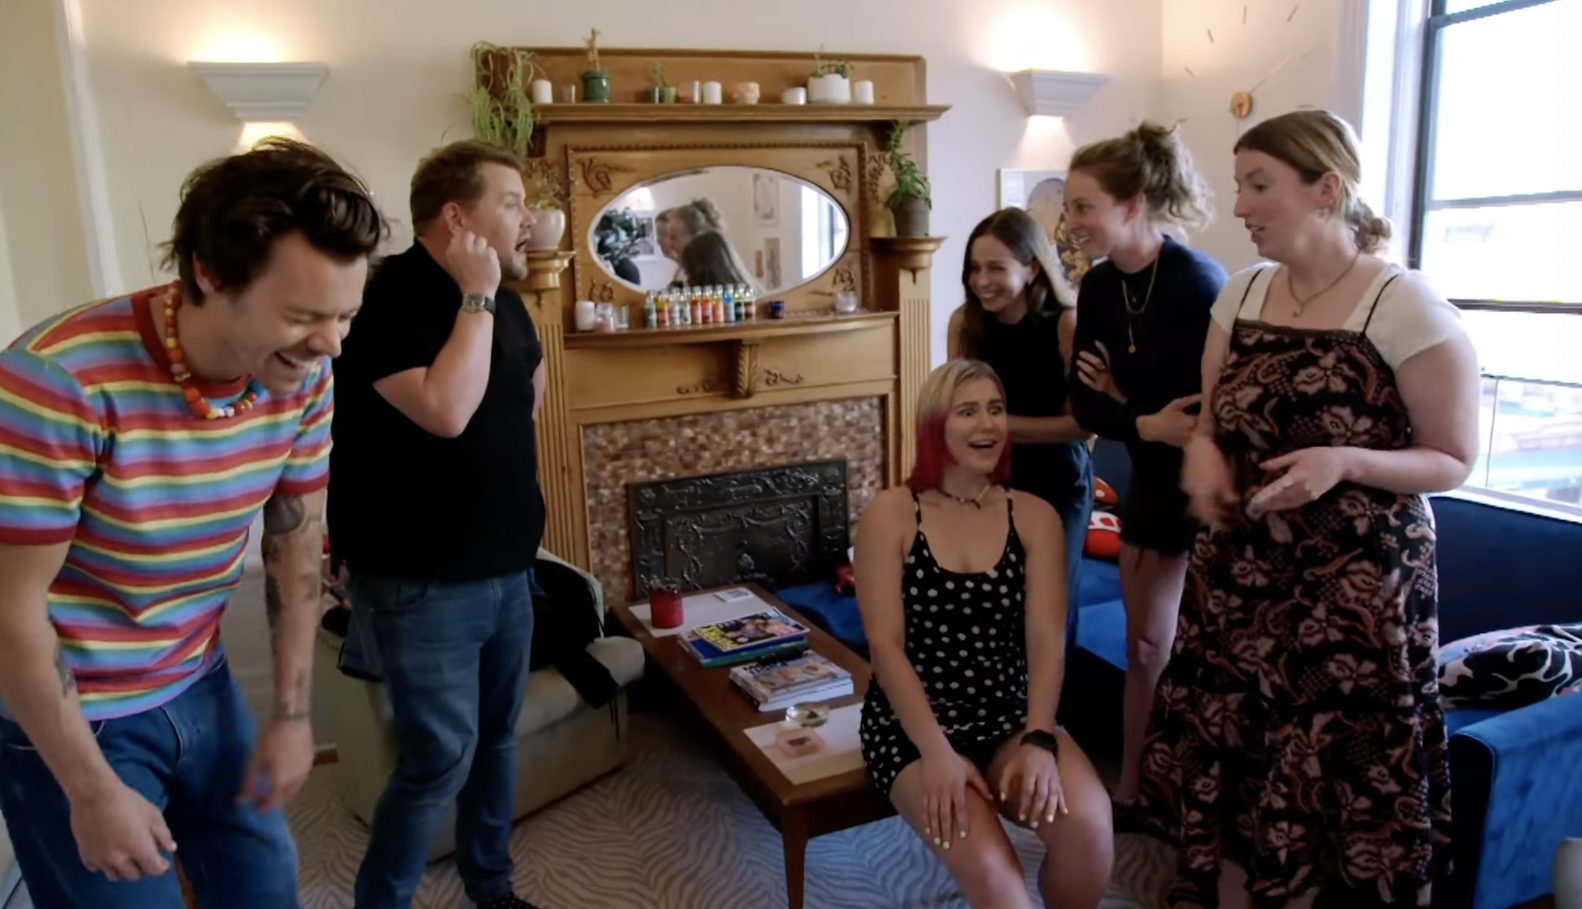 Styles laughs, Corden yells, and the four women look rattled in their apartment living room